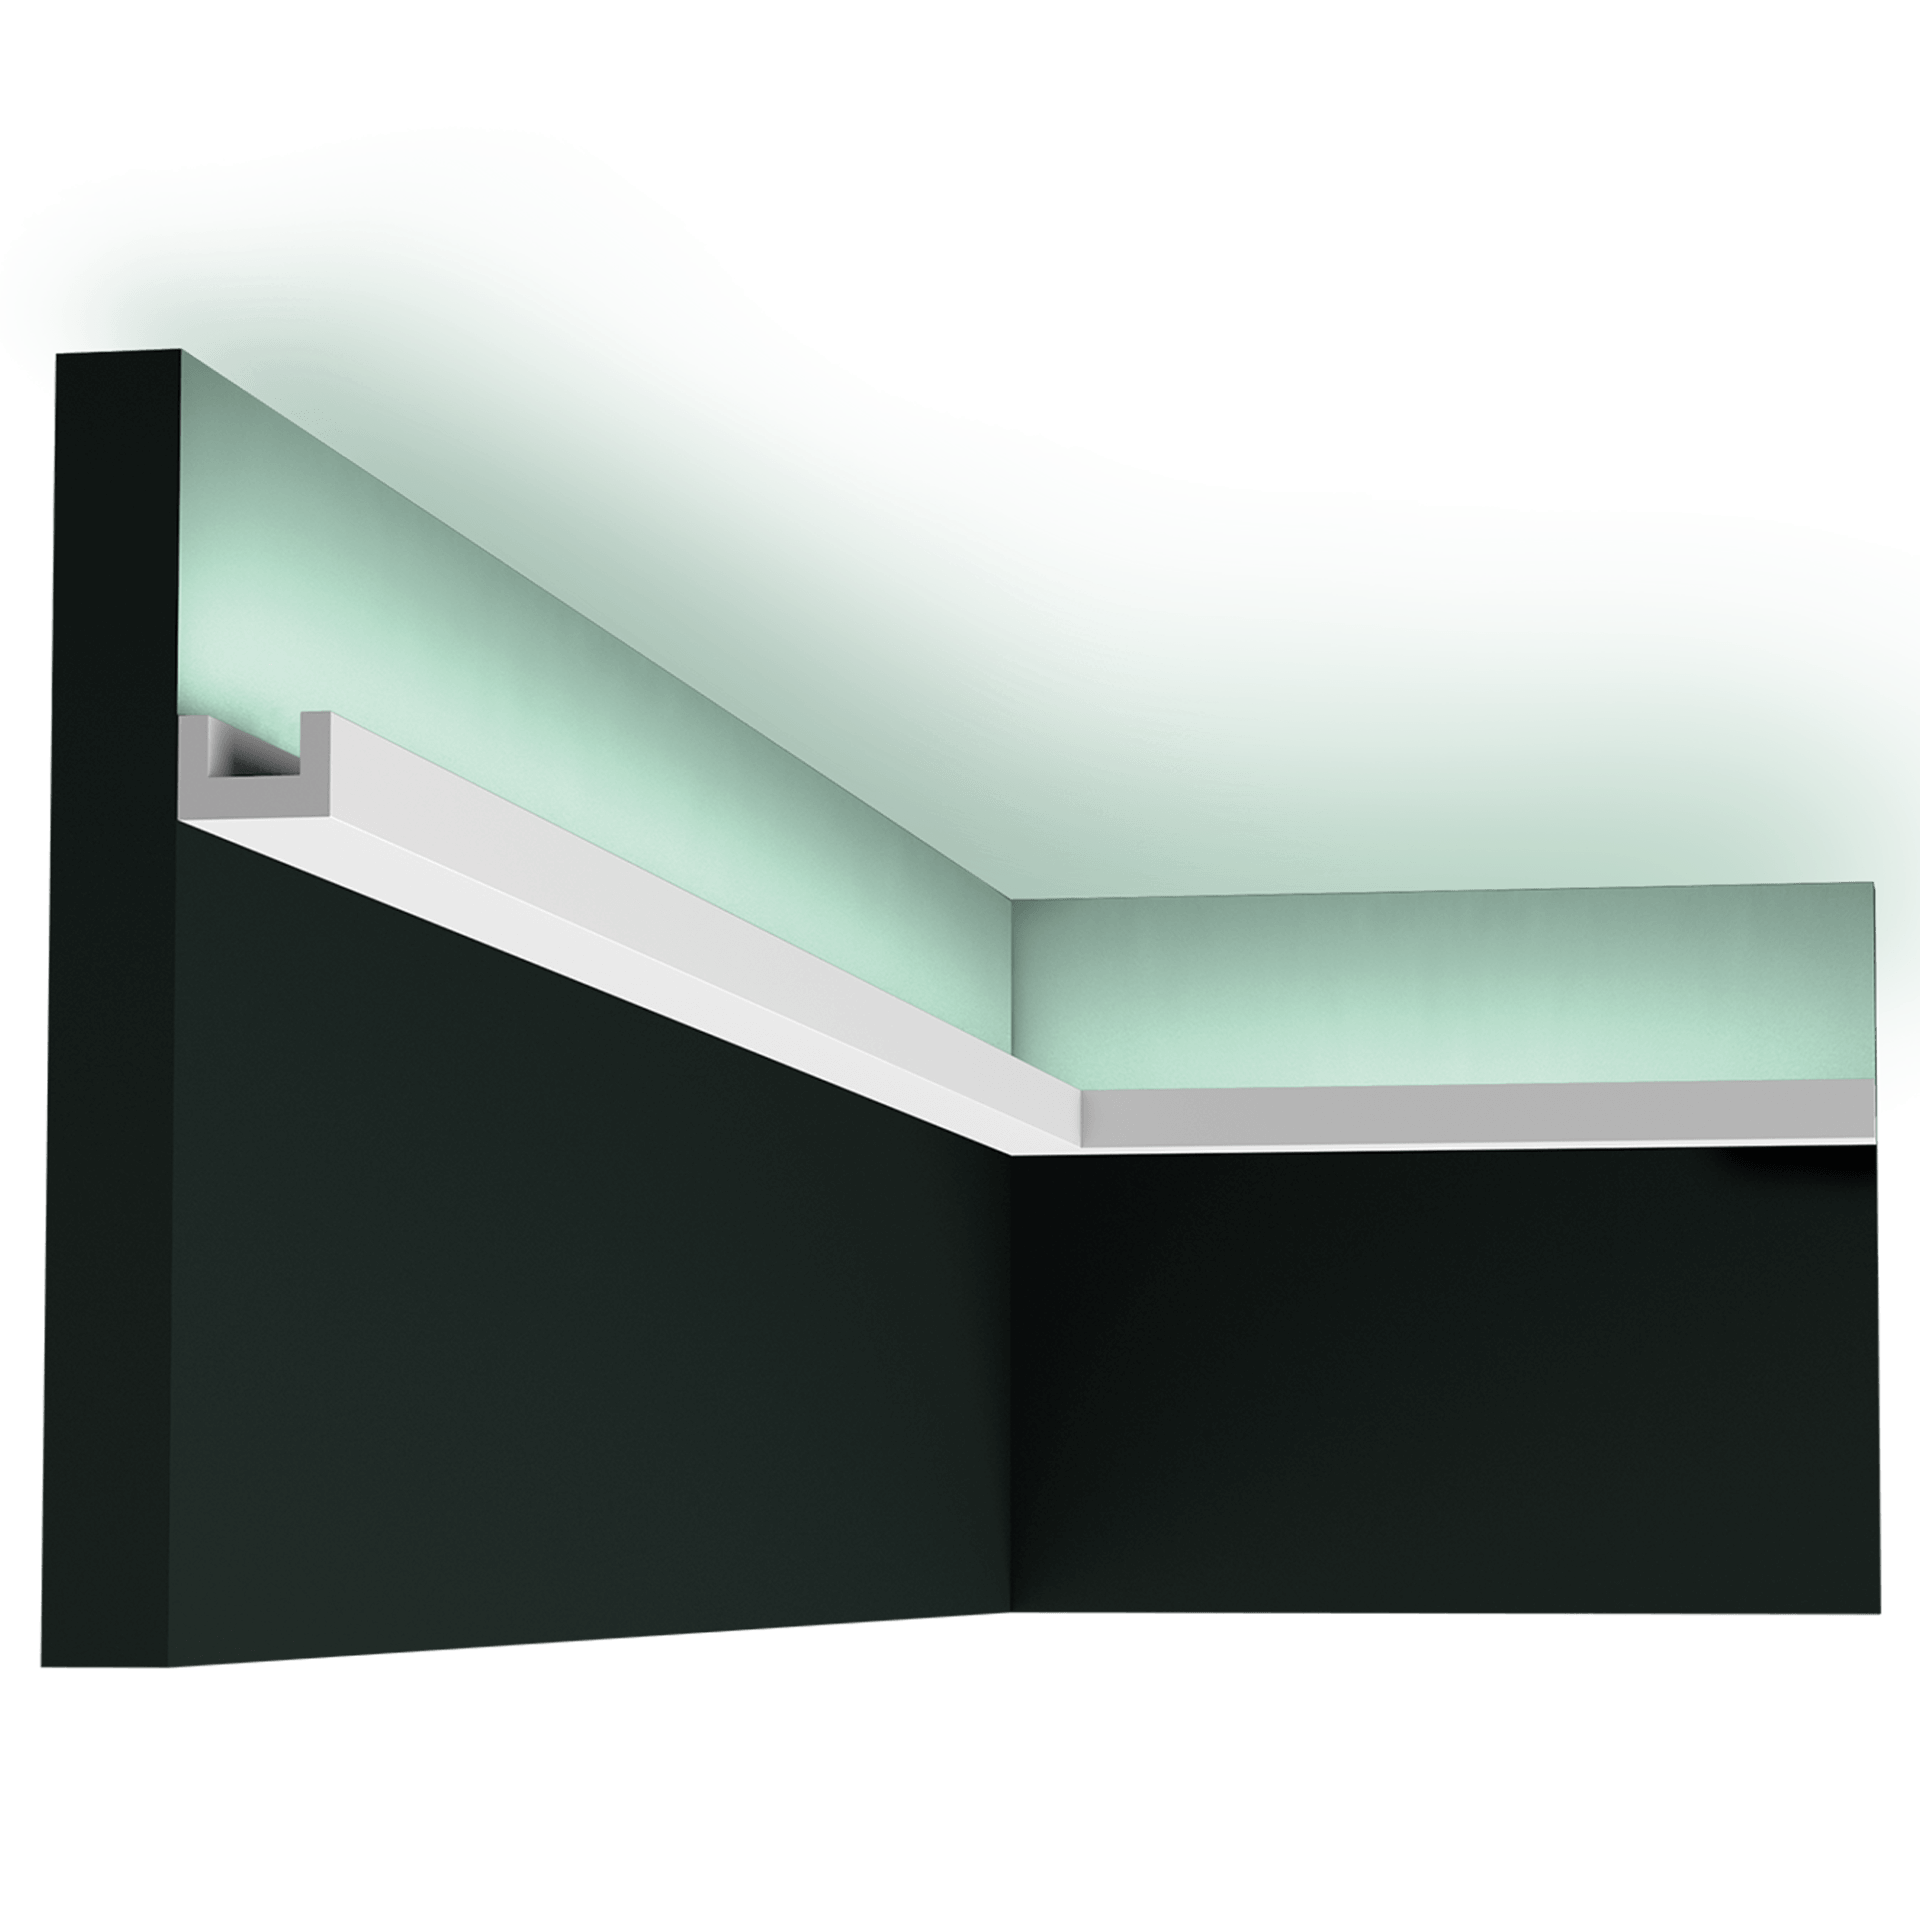 Subtle, impact-resistant U-shaped profile. Add ambience to your interior with indirect LED lighting. Designed by Orio Tonini. Installation remark: use an aluminum tape on the inside of the profile, or an aluminum LED support to avoid the light showing through the moulding.